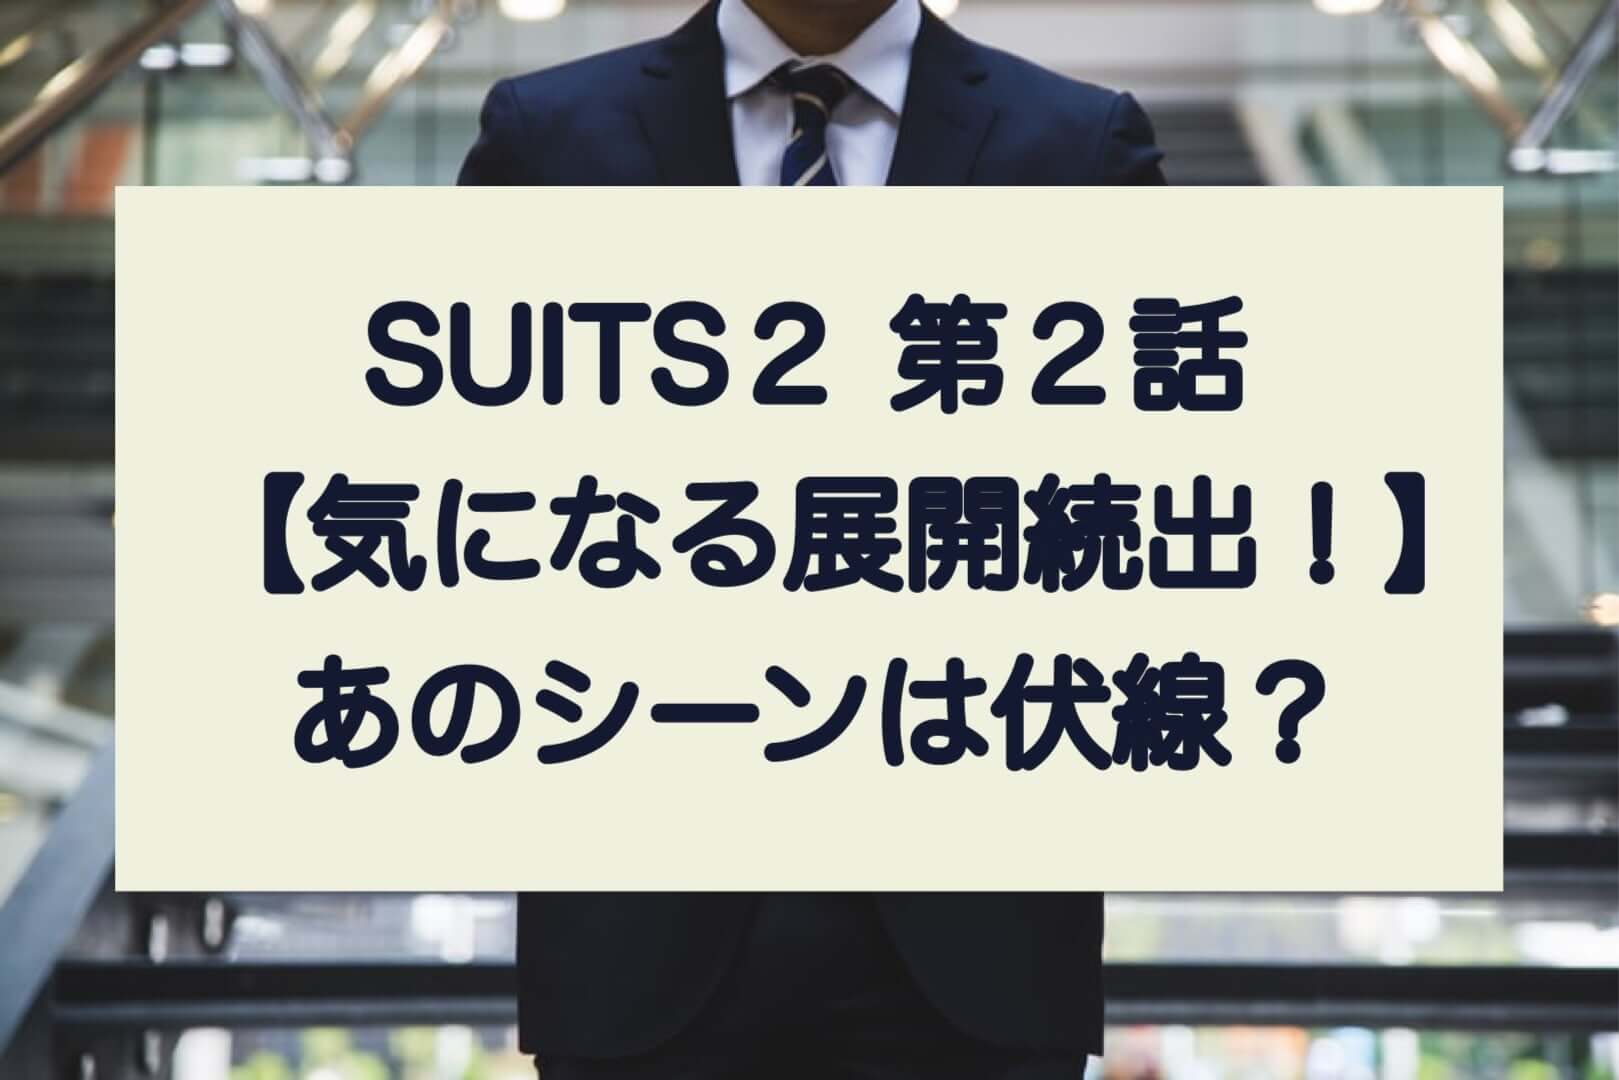 suits2 第2話 気になる展開続出！